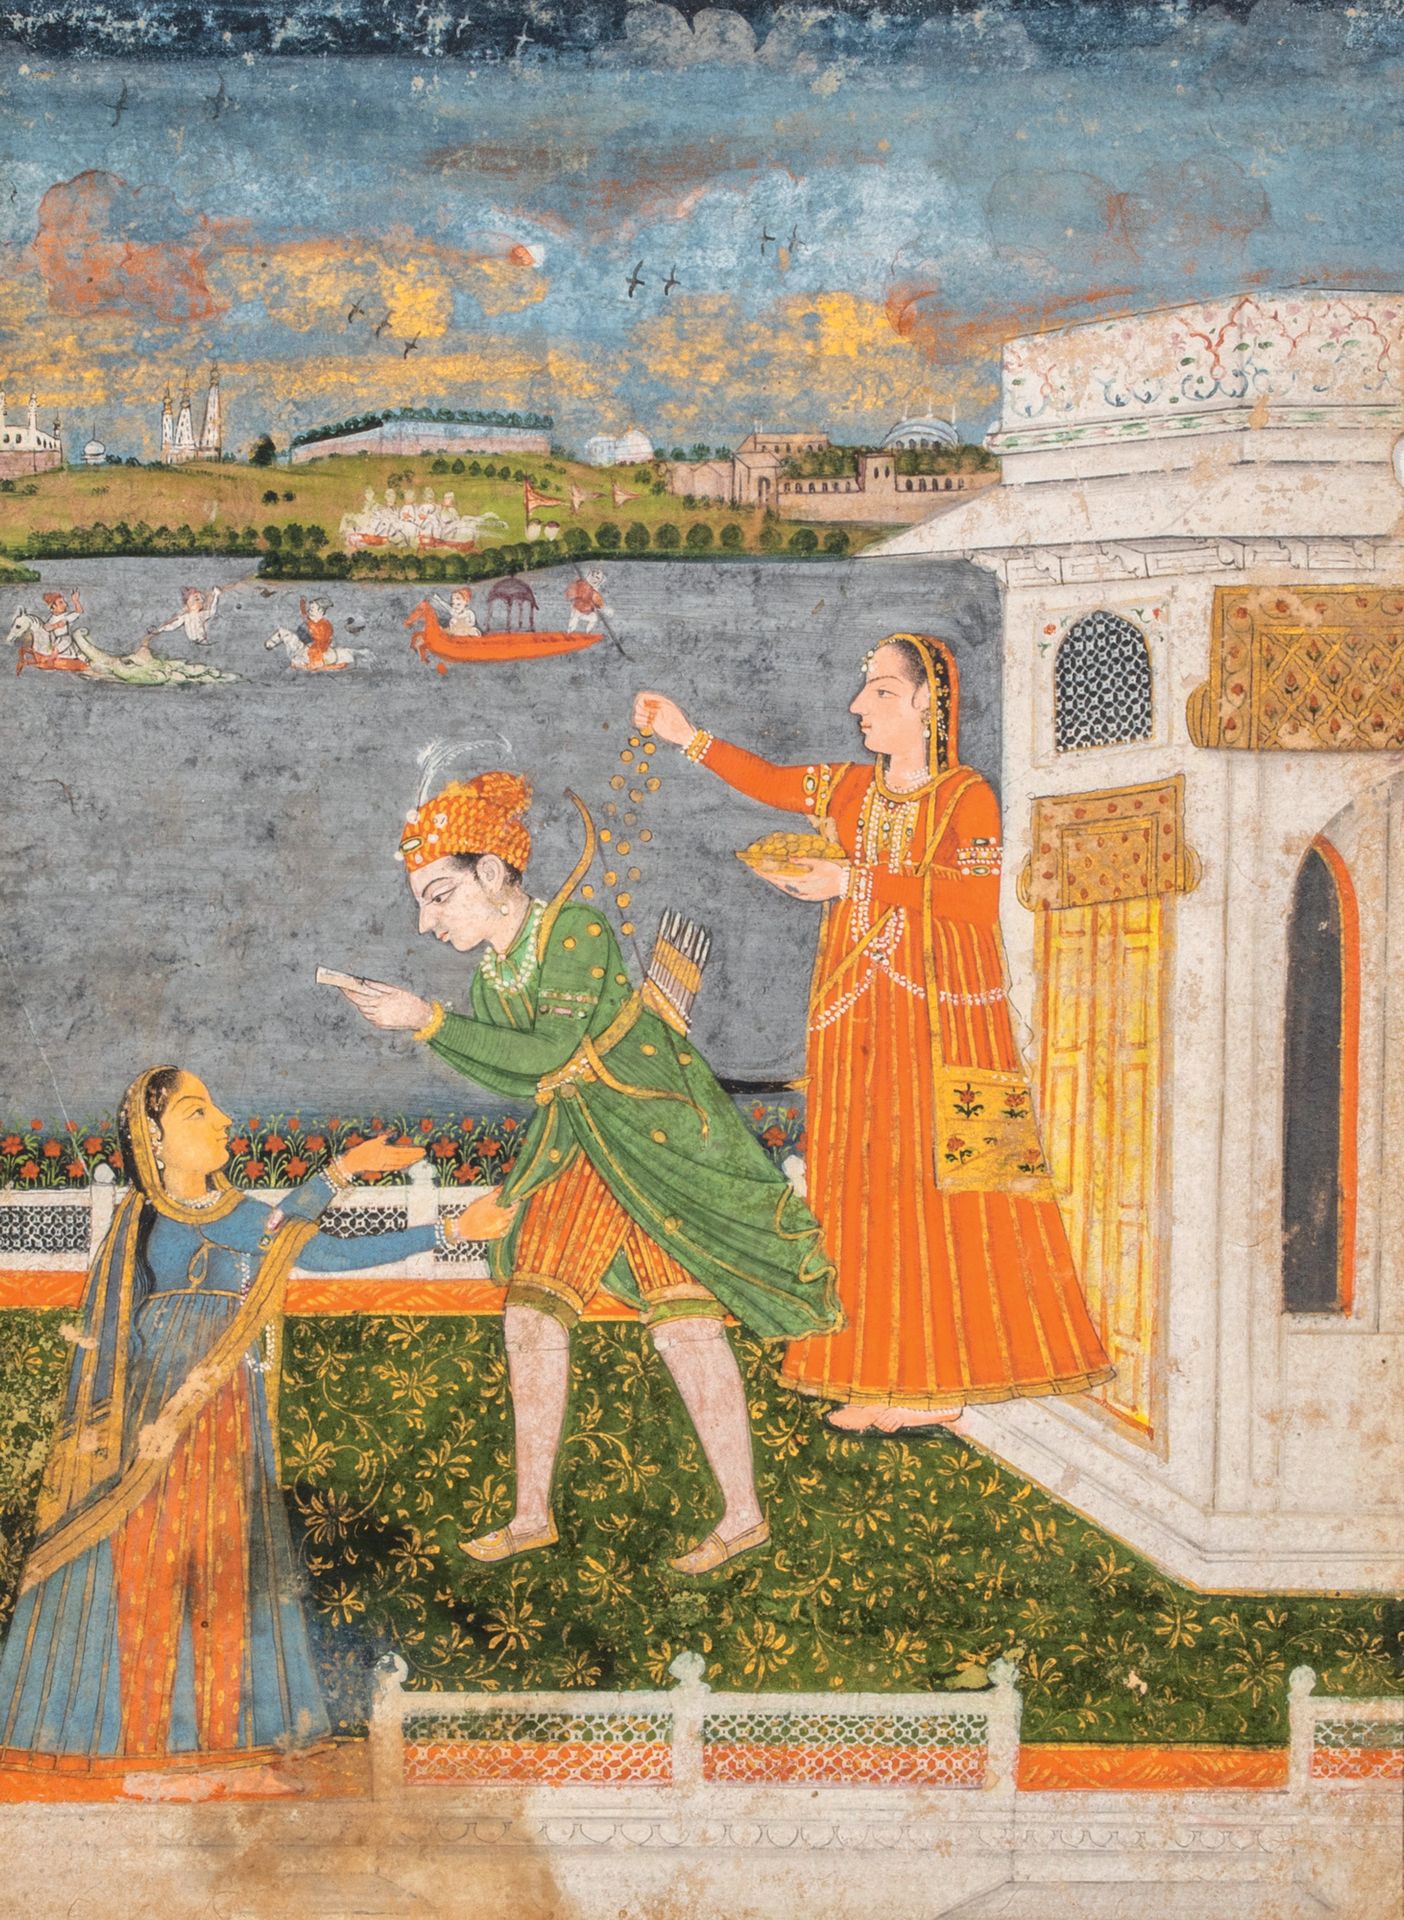 Null Nobleman accompanied by two women Pigments and gold on paper
North India, L&hellip;